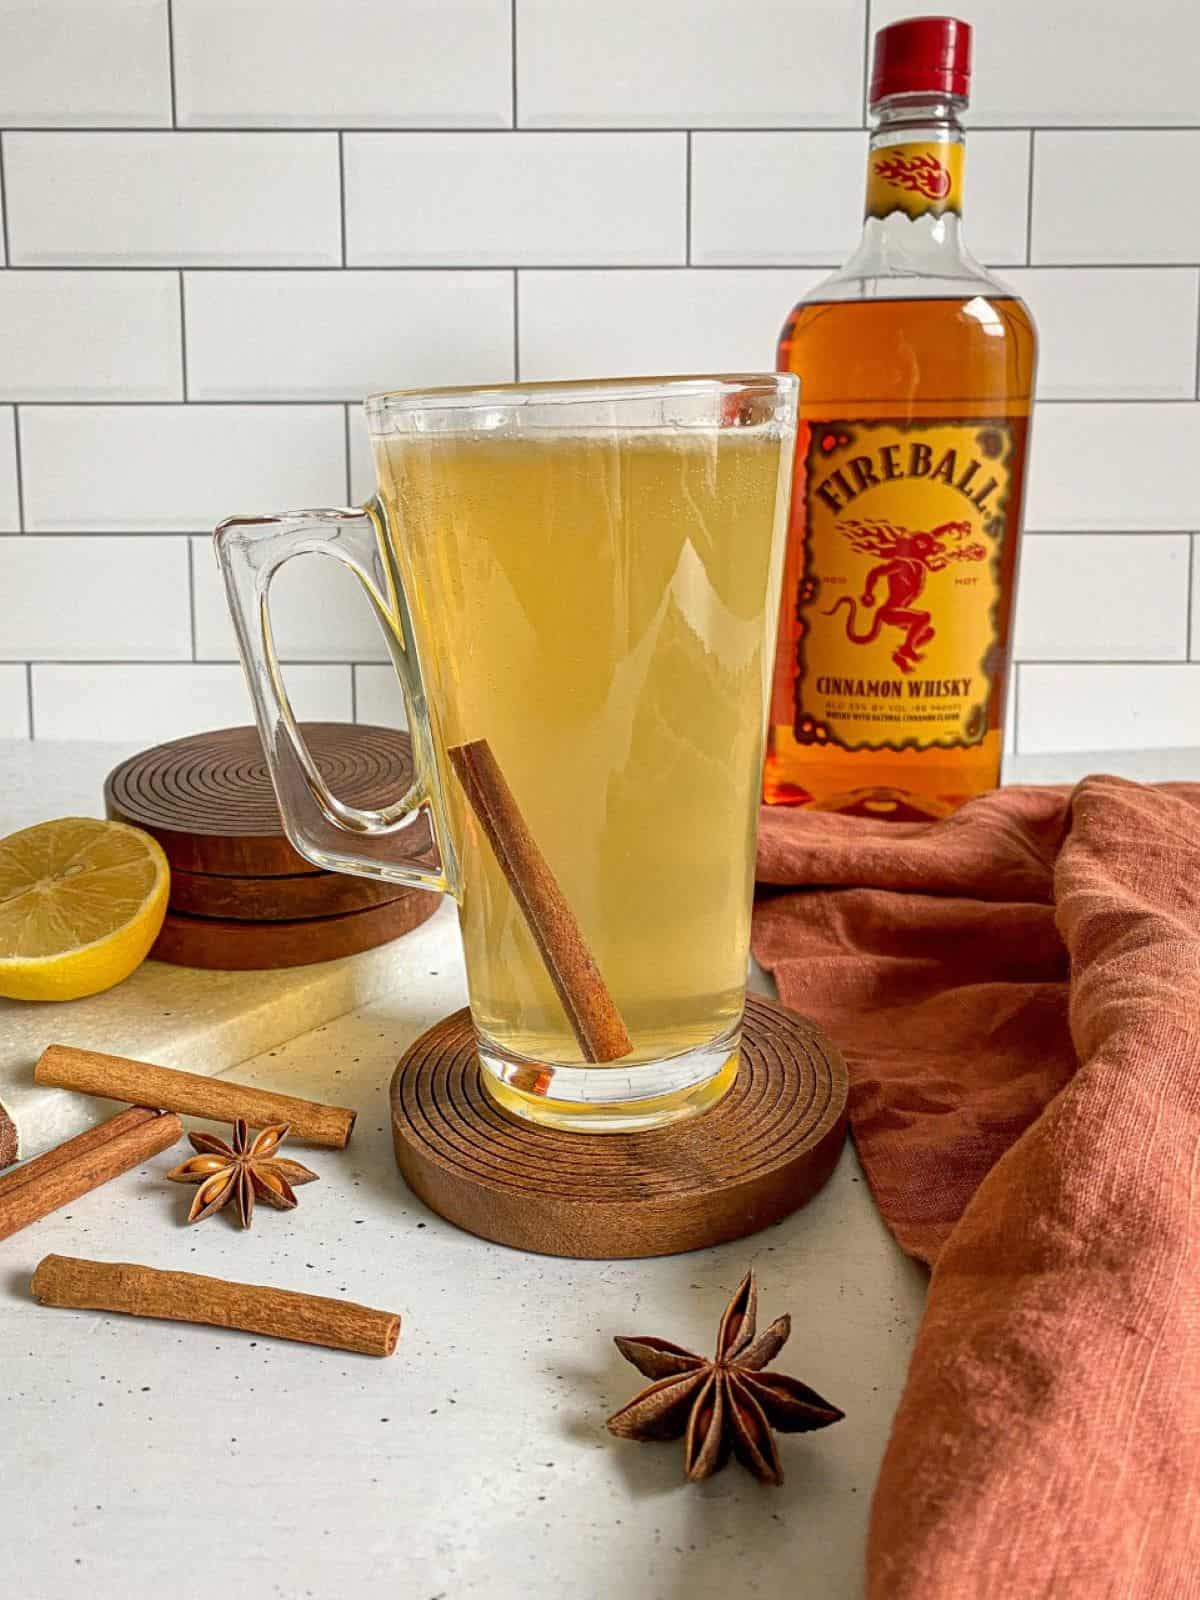 A tall clear mug is filled with Fireball Hot Toddy. The drink is surrounded by a bottle of whiskey, sliced lemon, and cinnamon sticks.